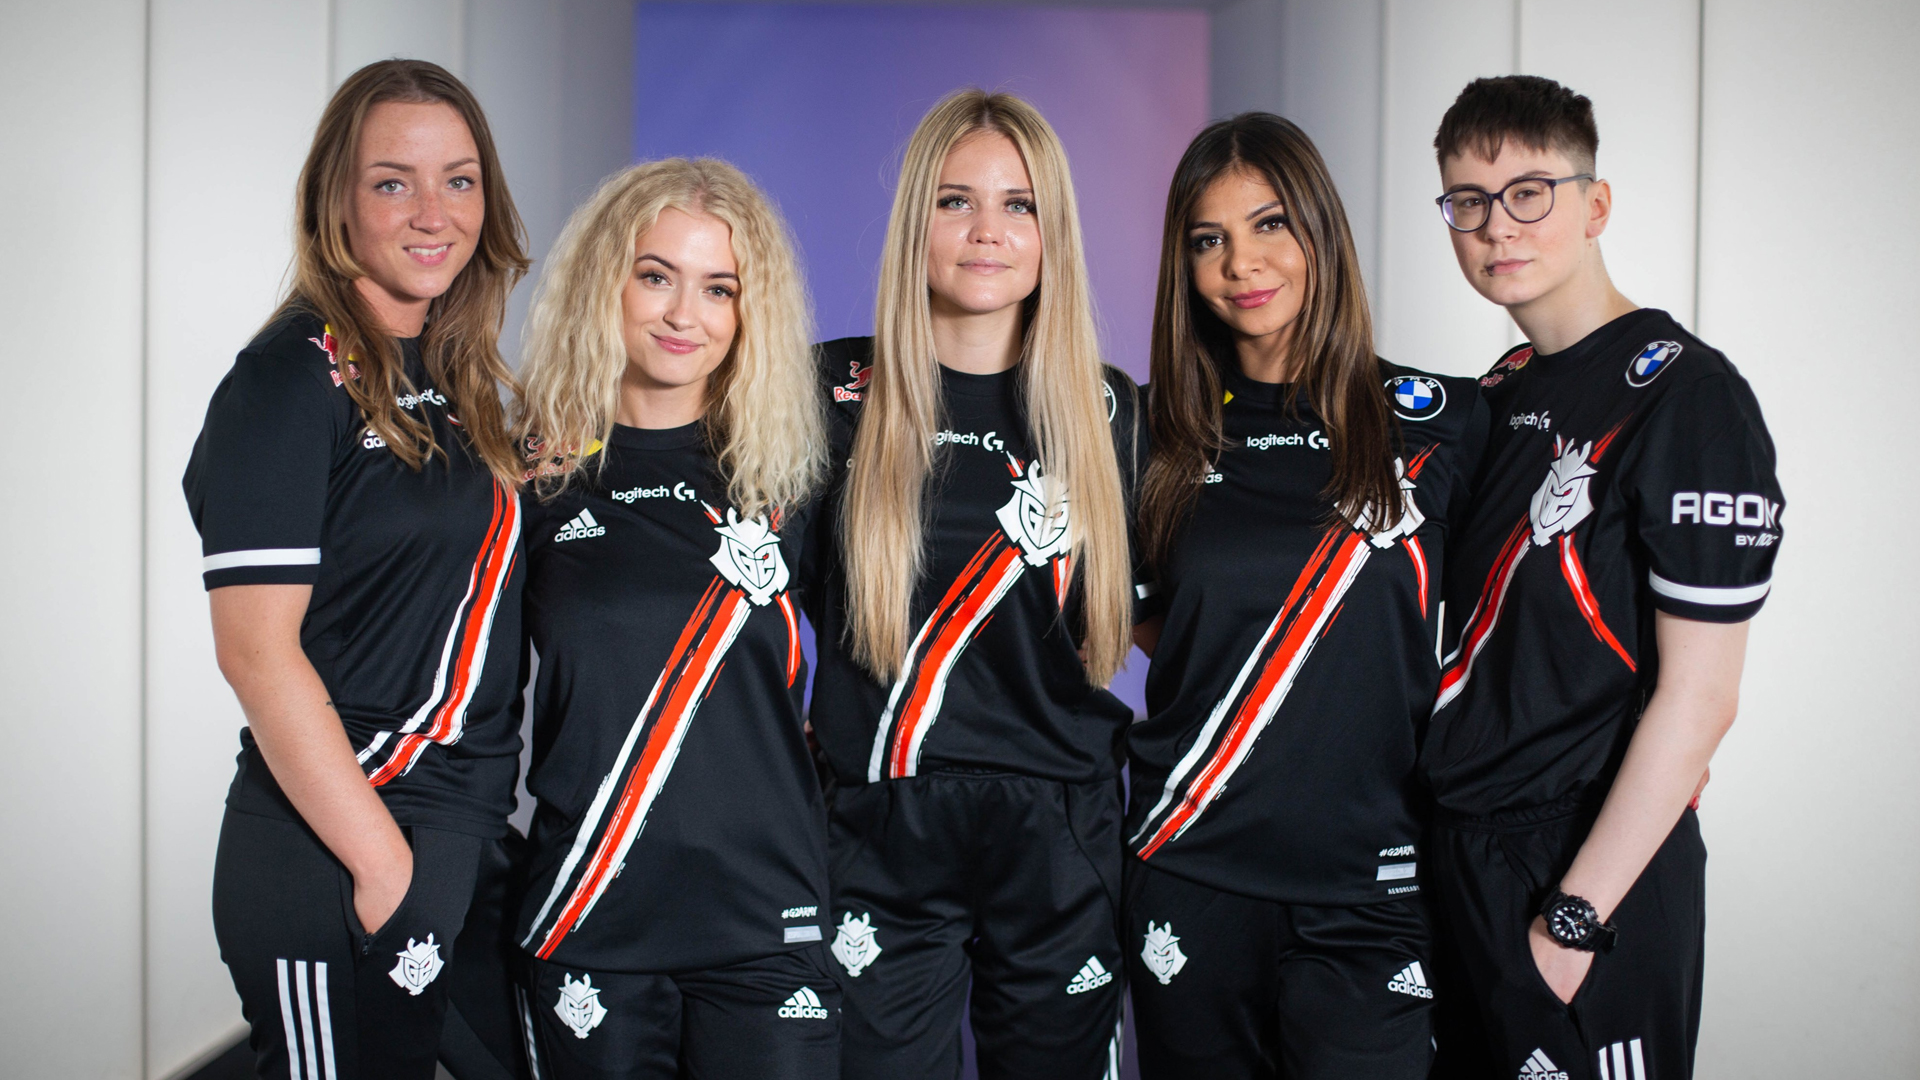 G2 Esports signs its first allfemale Valorant team ONE Esports